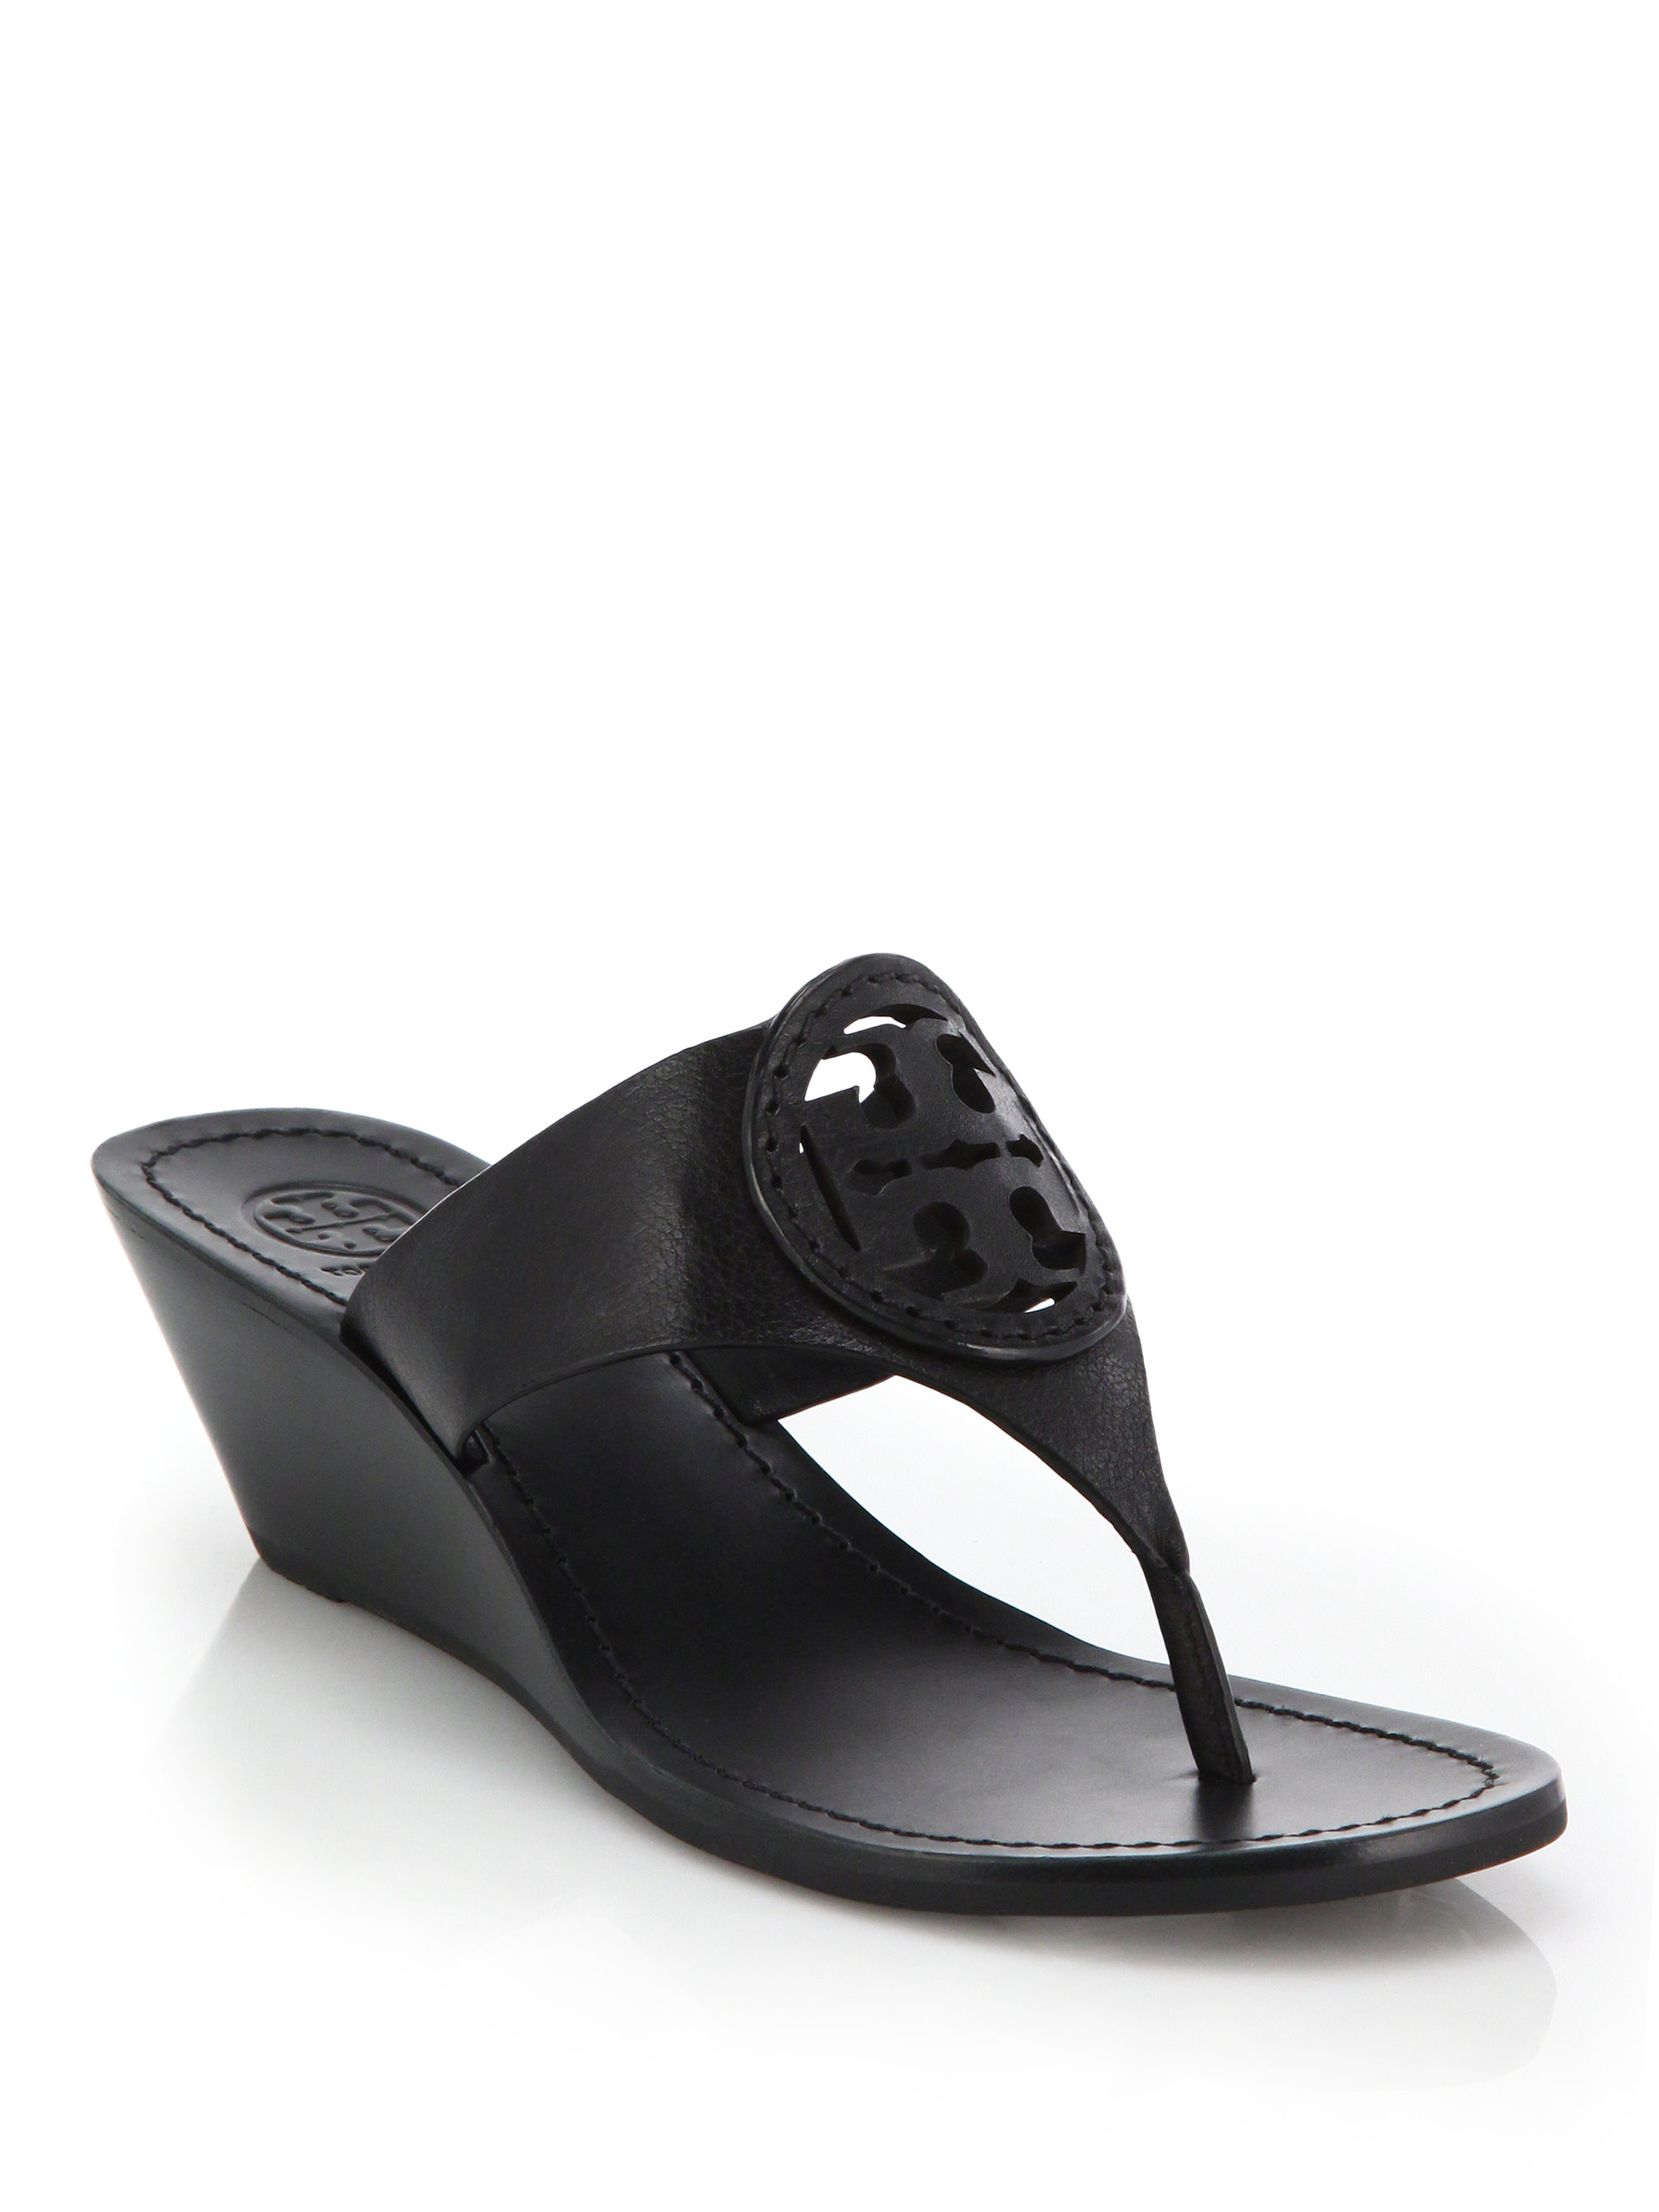 Tory burch Louisa Leather Thong Wedge Sandals in Black | Lyst